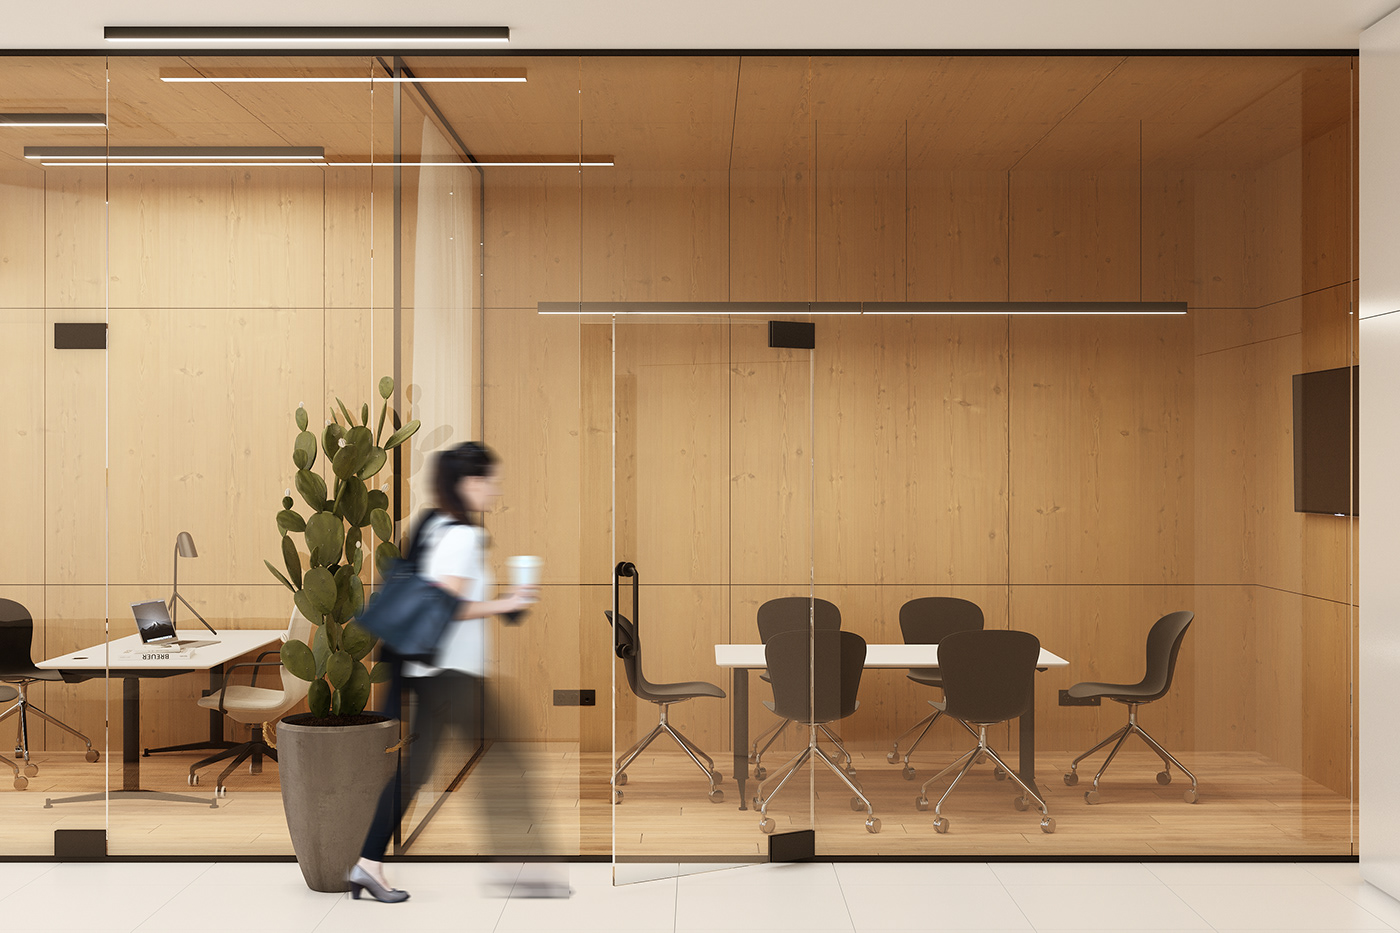 Agile Development black ceiling Black&white cactus galaxy interior glazing Office open ceiling Open Space plywood